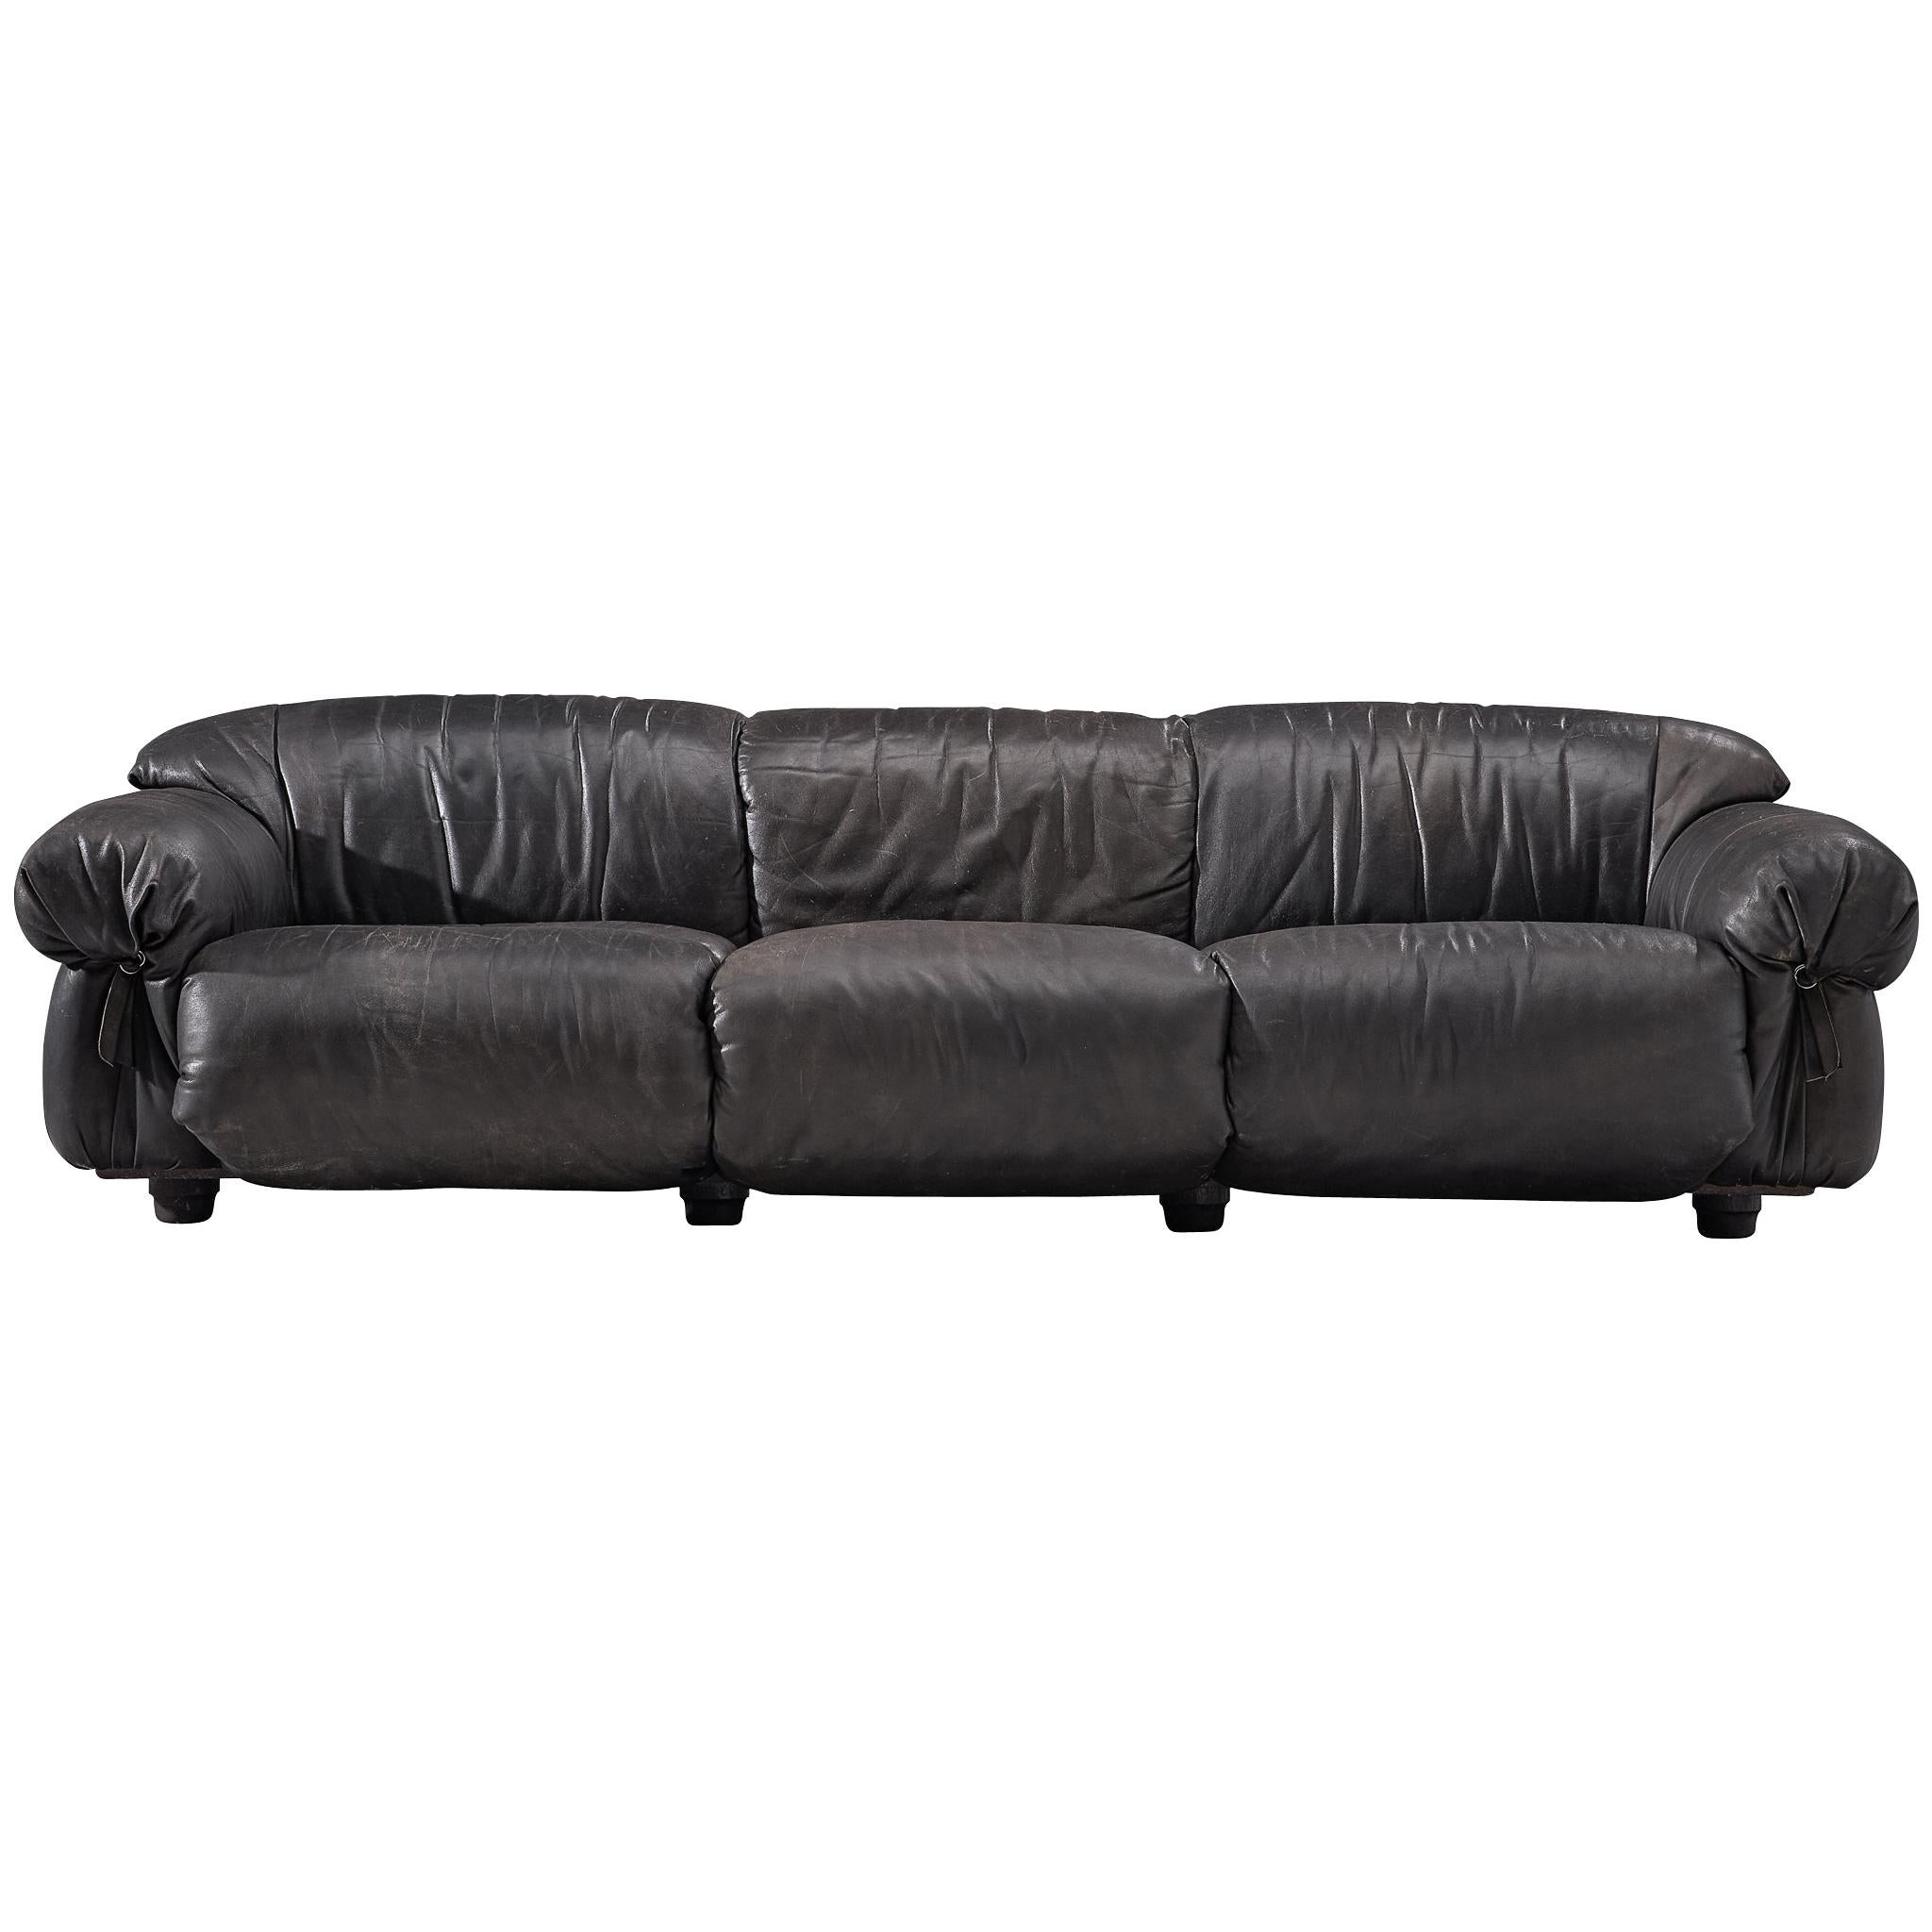 Grand Sofa in Black Patinated Leather, 1970s